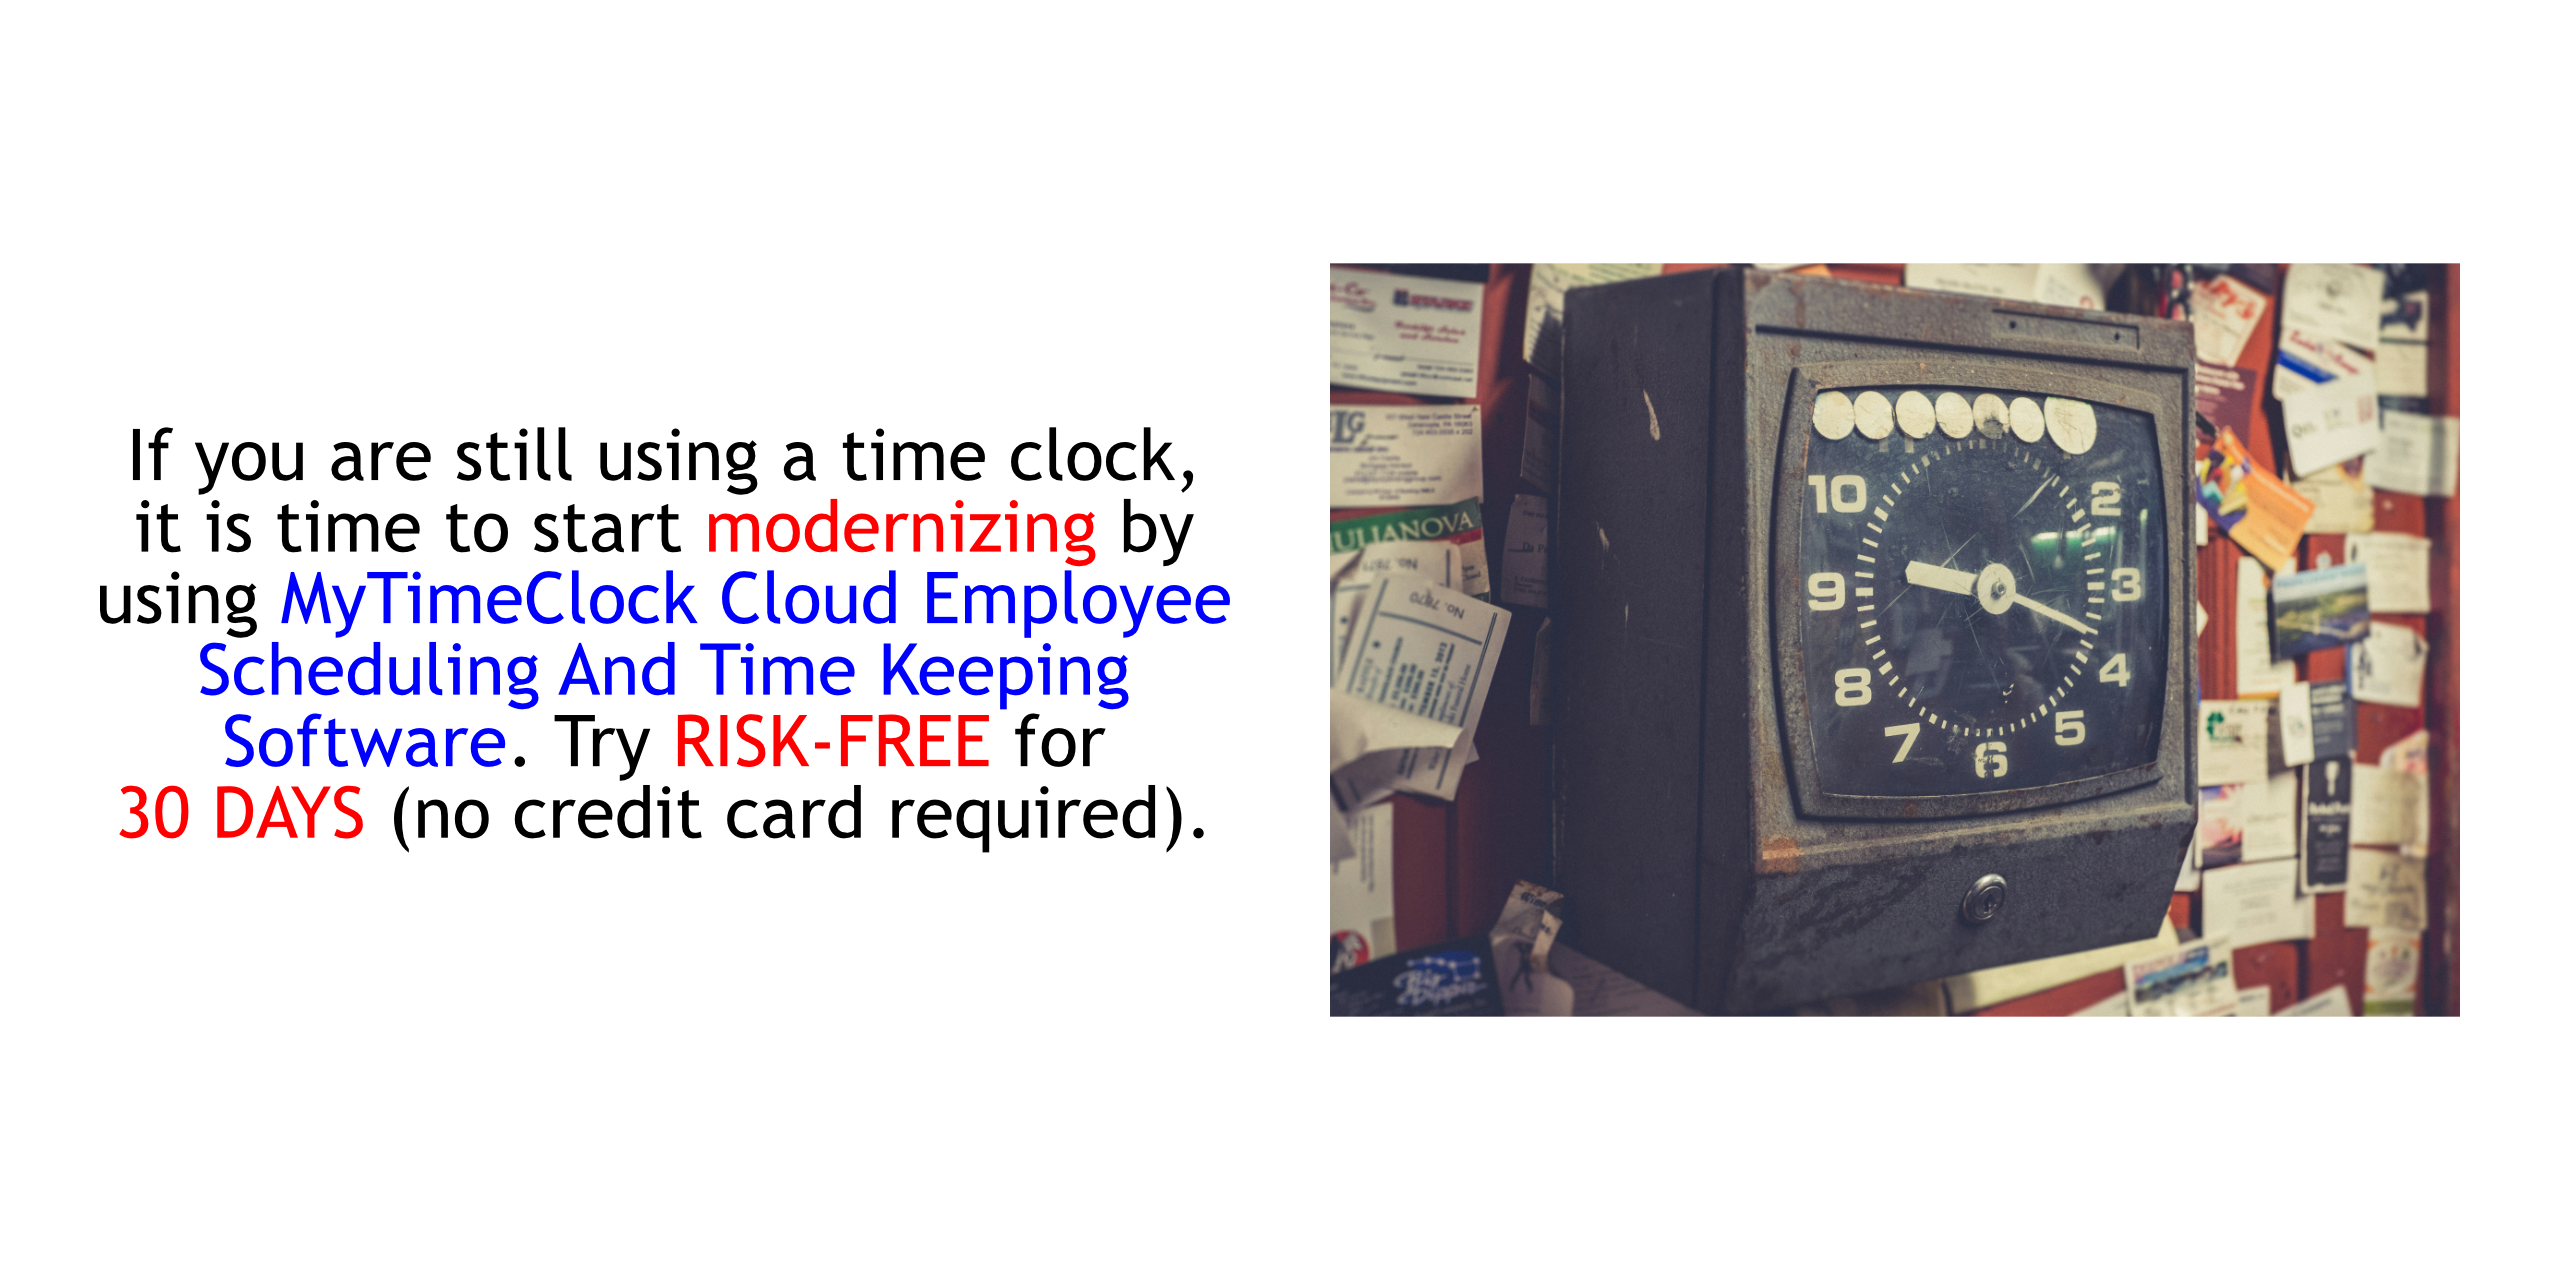 If you are still using a time clock, it is time to start modernizing by using MyTimeClock Employee Scheduling And Time Keeping Cloud Software.  Try RISK-FREE FOR THIRTY (30) DAYS (NO CREDIT CARD REQUIRED; CANCELS AUTOMATICALLY IF YOU DO NOT SUBSCRIBE).